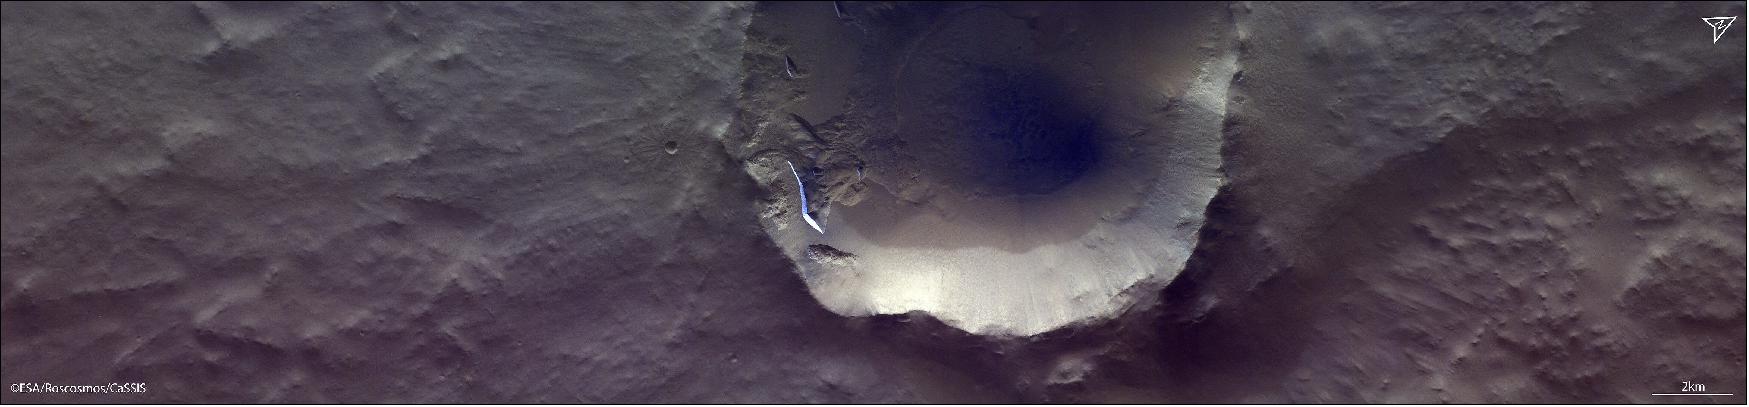 Figure 16: Despite the low light in this late evening image, several north-facing icy scarps are distinctly visible because of their covering of bright white carbon dioxide frost. The frost disappears in spring, but remains late on these scarps because of their pole-facing orientation. - This 11 km diameter crater is located in the northern plains of Mars at 55º16'51.6'N/106º25'3.4'W, north of Alba Mons (image credit: ESA/Roscosmos/CaSSIS, CC BY-SA 3.0 IGO)